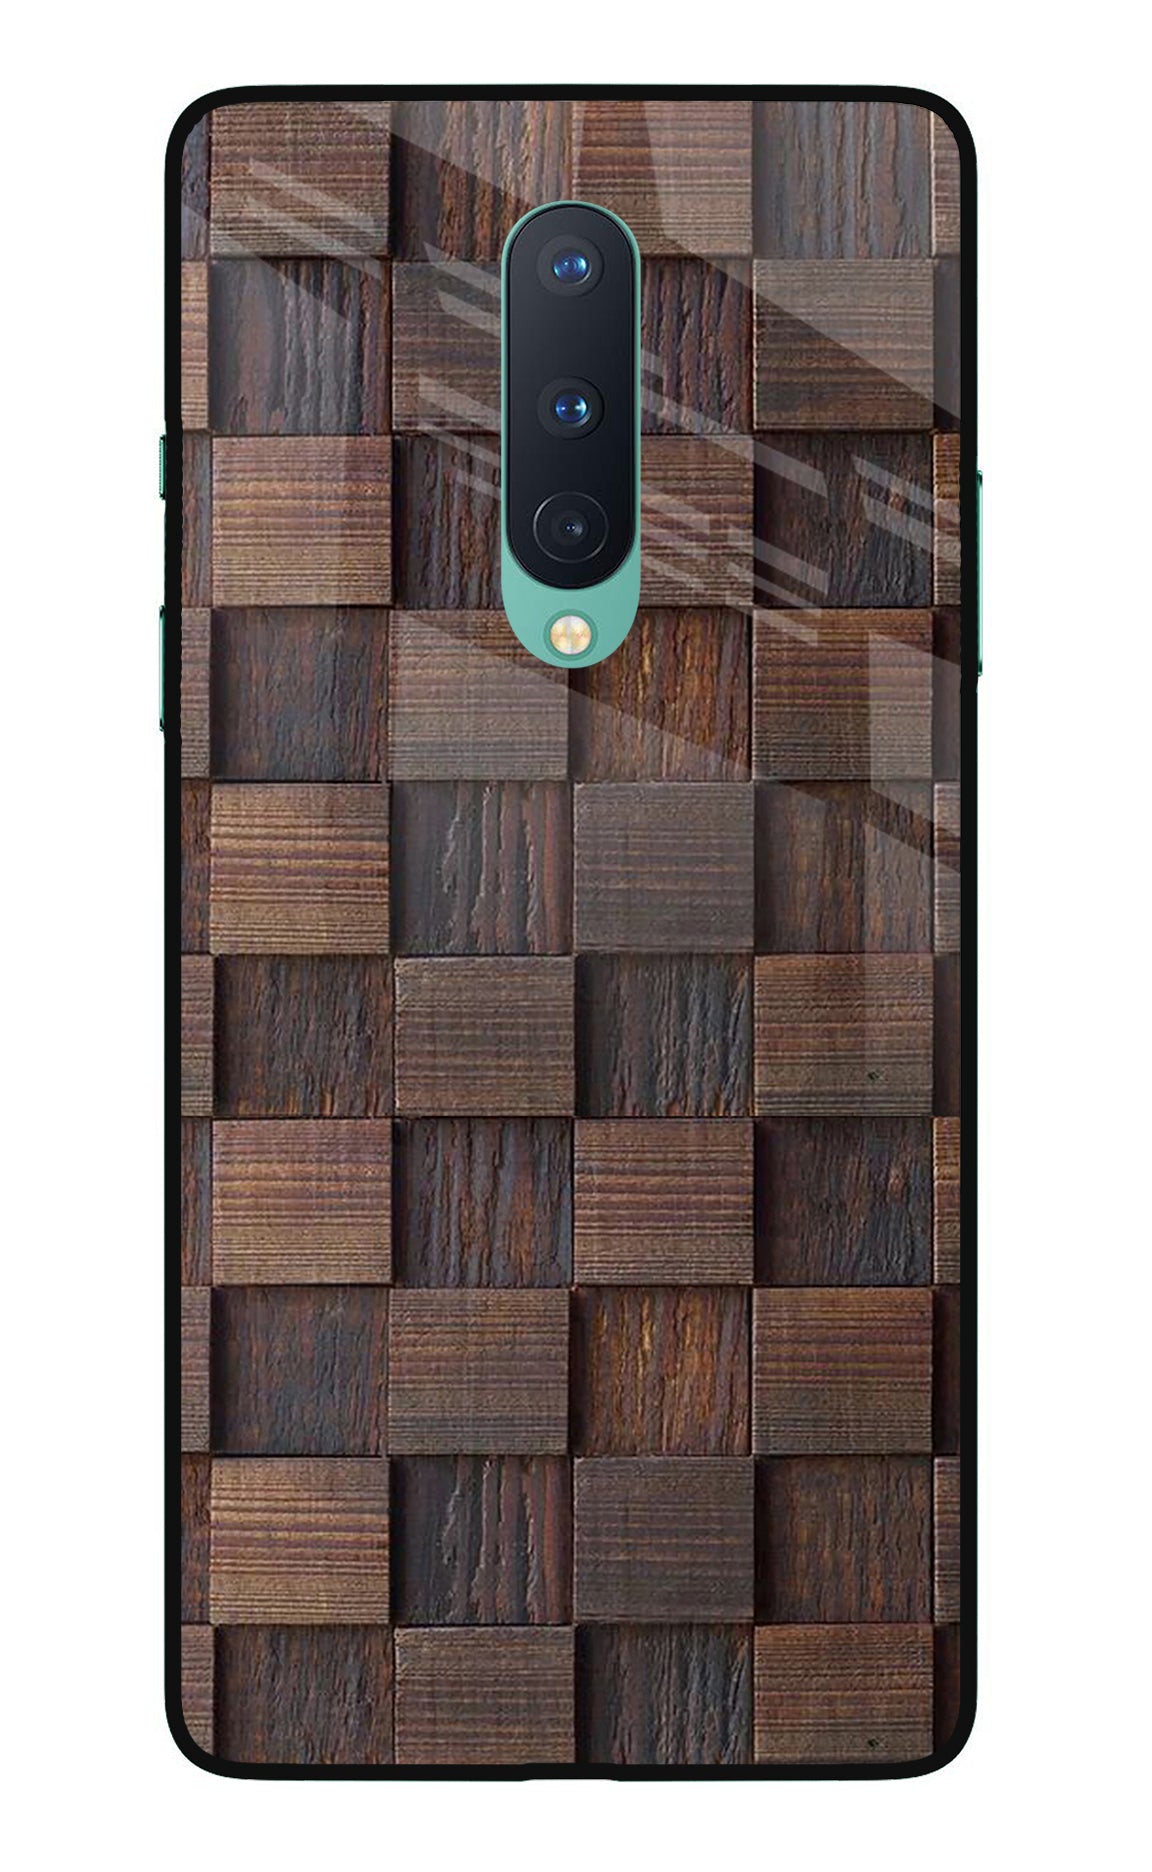 Wooden Cube Design Oneplus 8 Back Cover